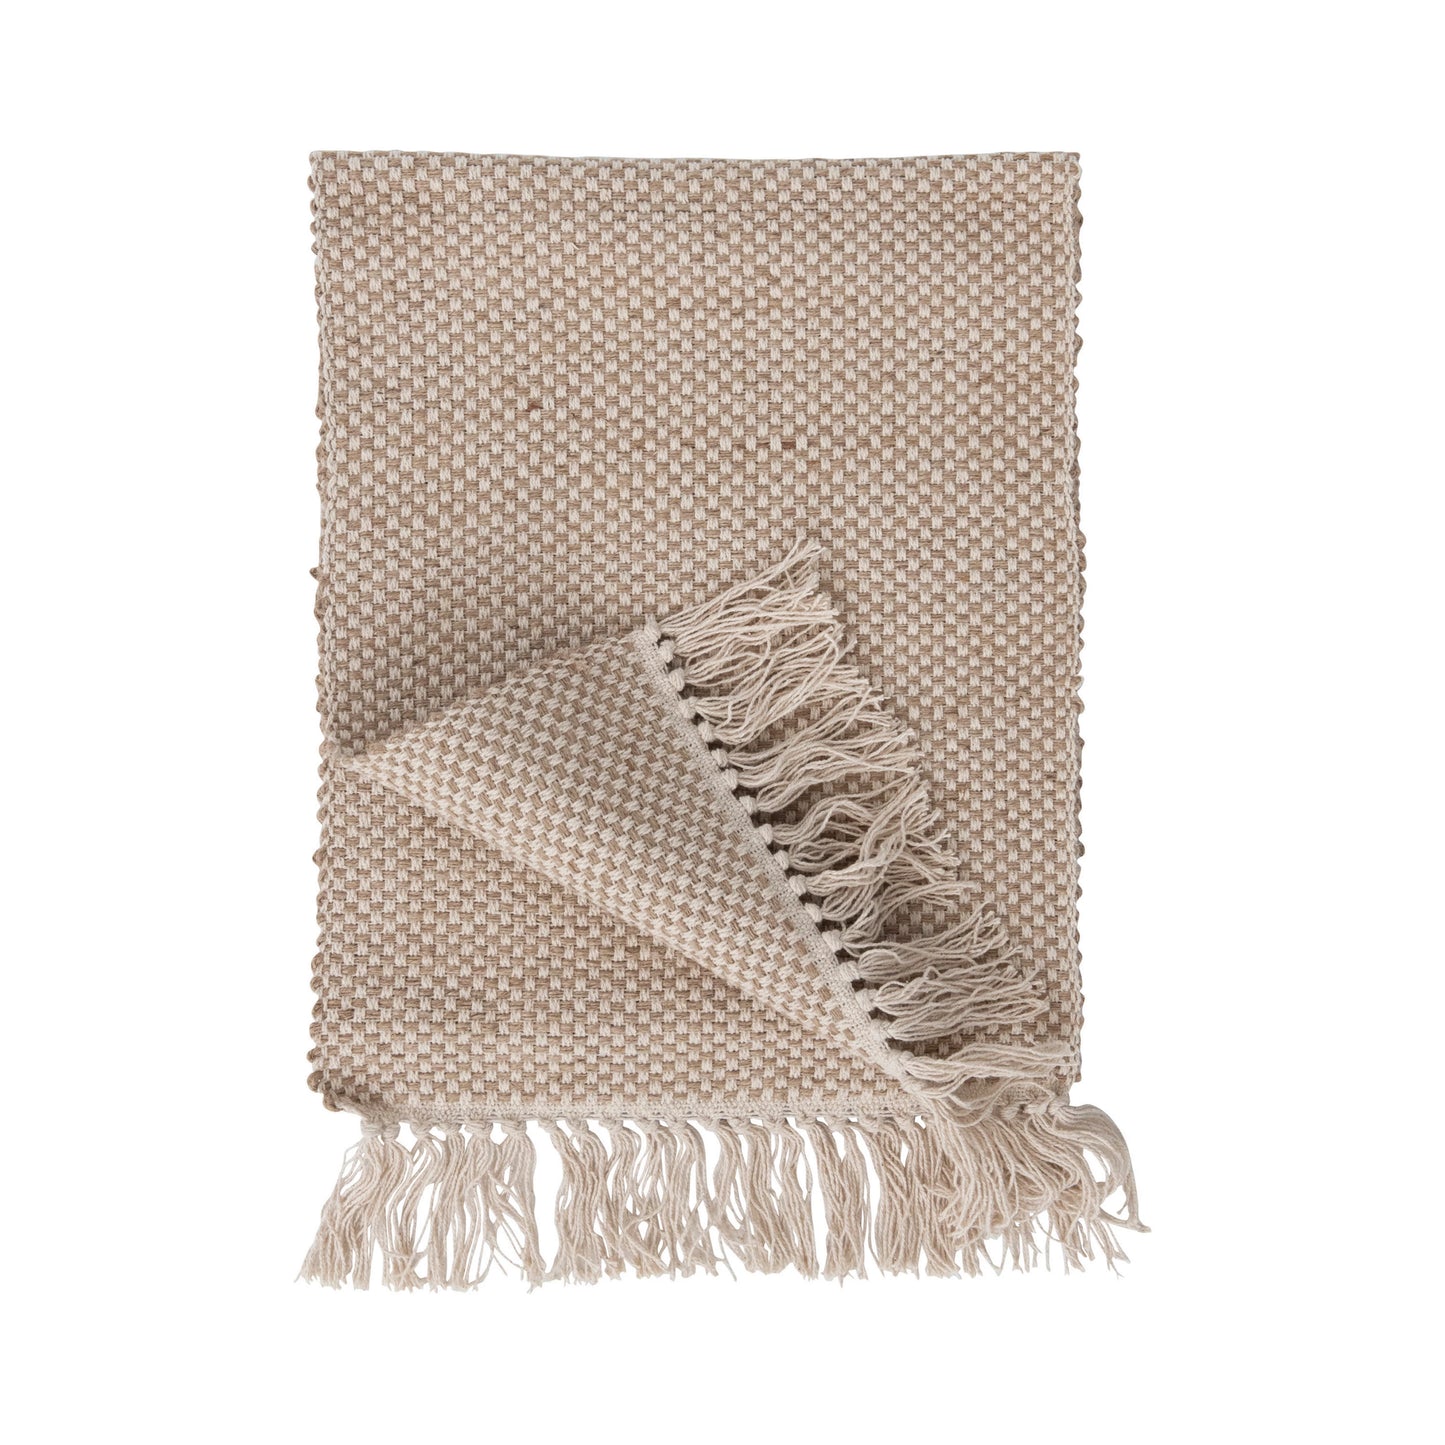 Woven Jute and Cotton Table Runner w/ Fringe | Natural & Cream